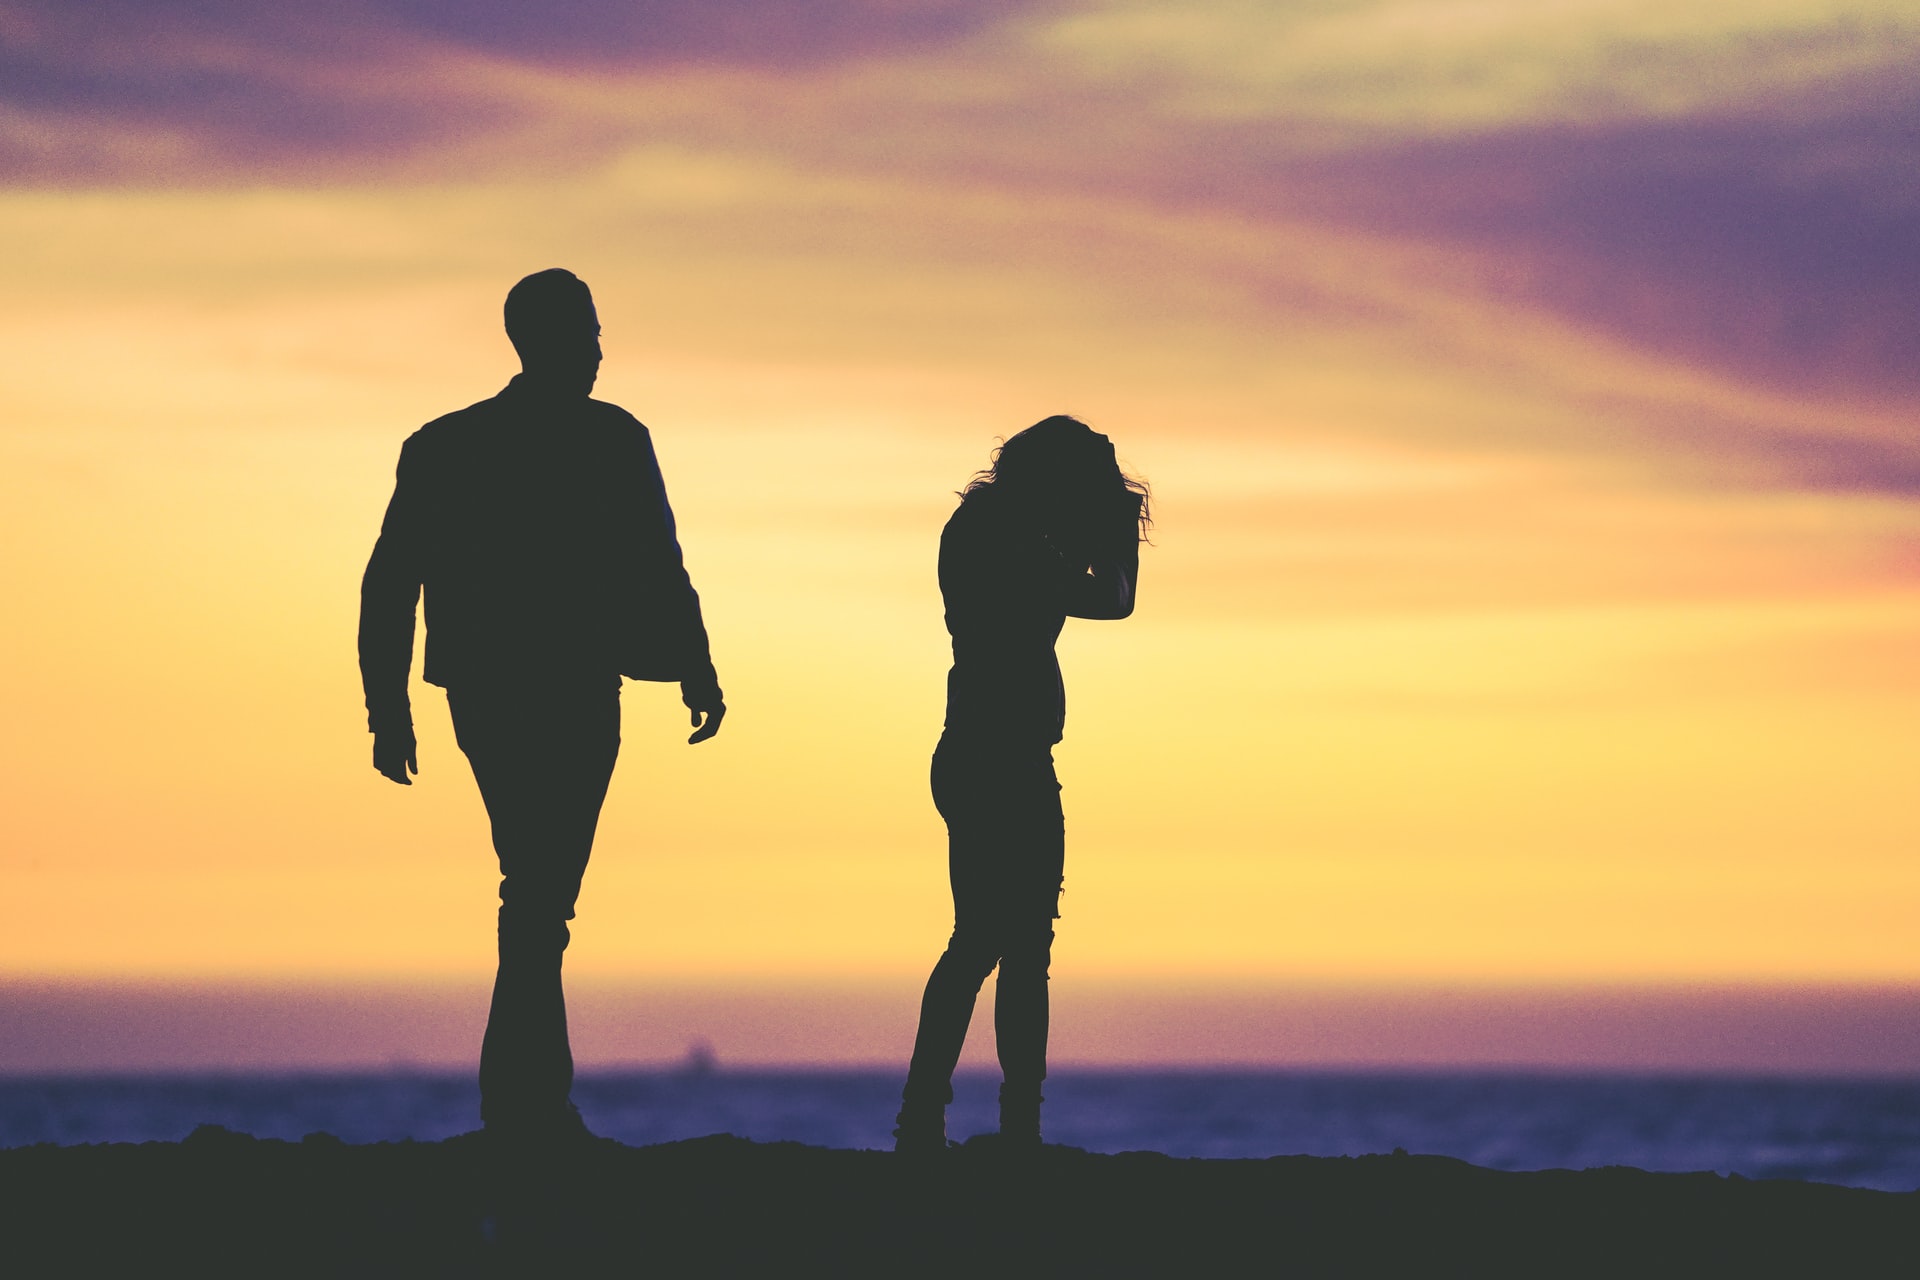 Silhouetted man and woman, both in their early 20s, stand apart on a beach at sunset, with a vibrant purple and orange sky in the background.